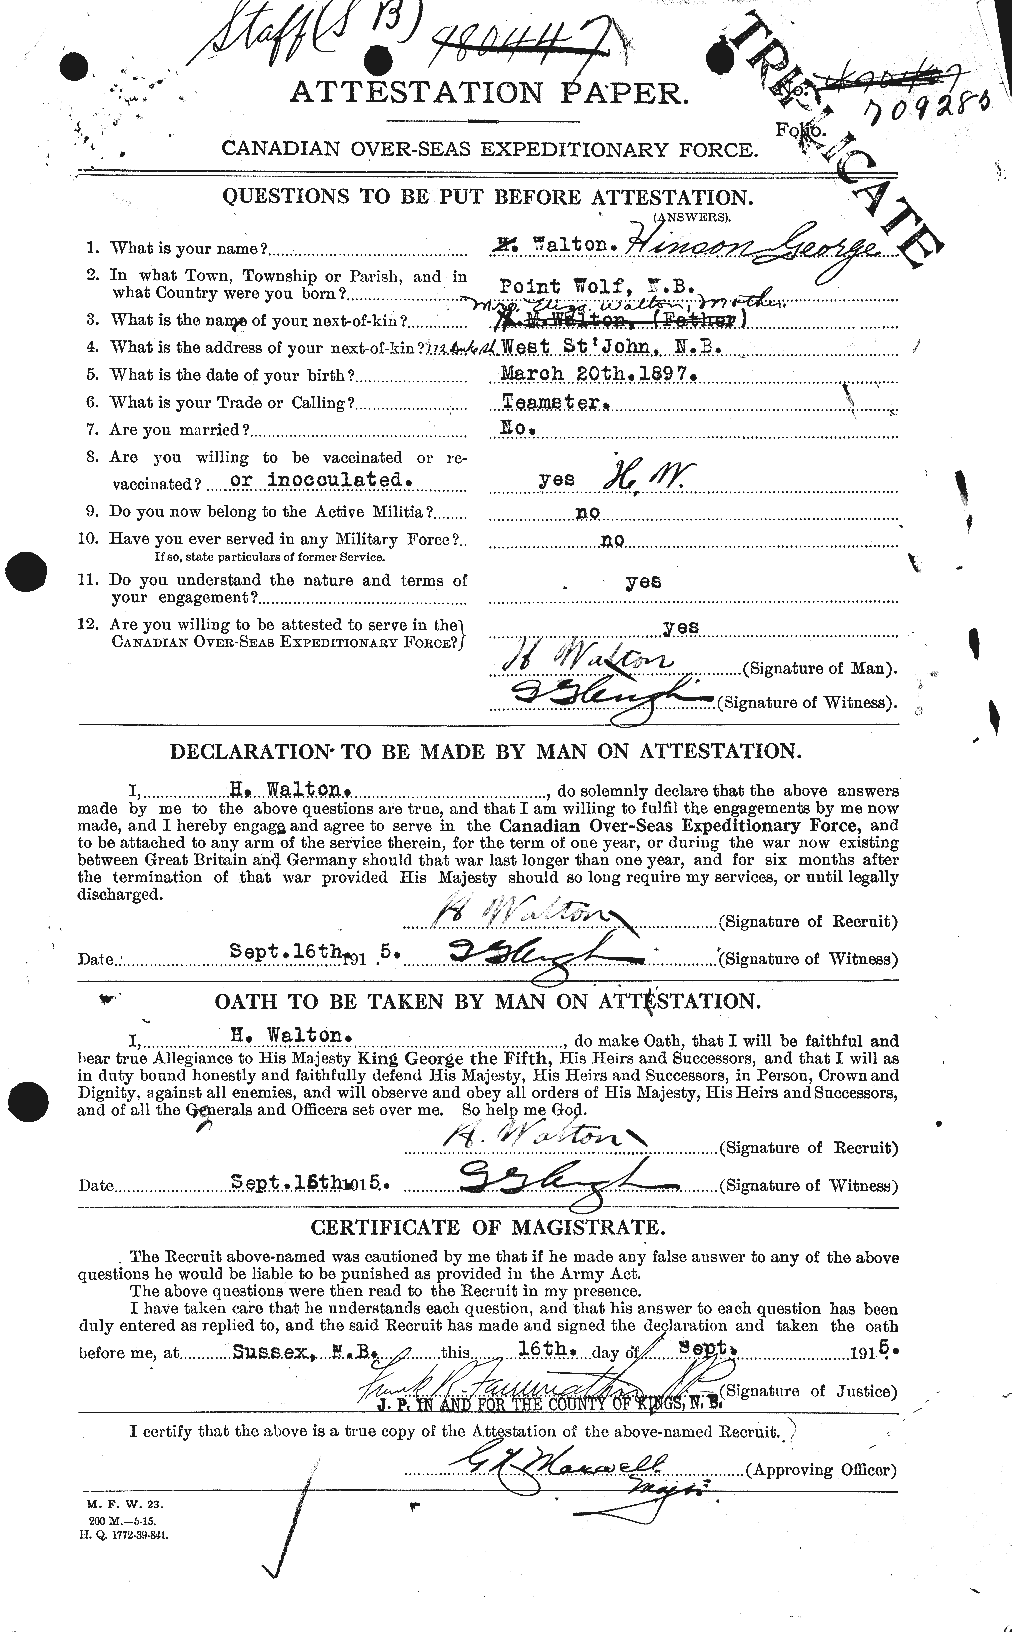 Personnel Records of the First World War - CEF 656830a